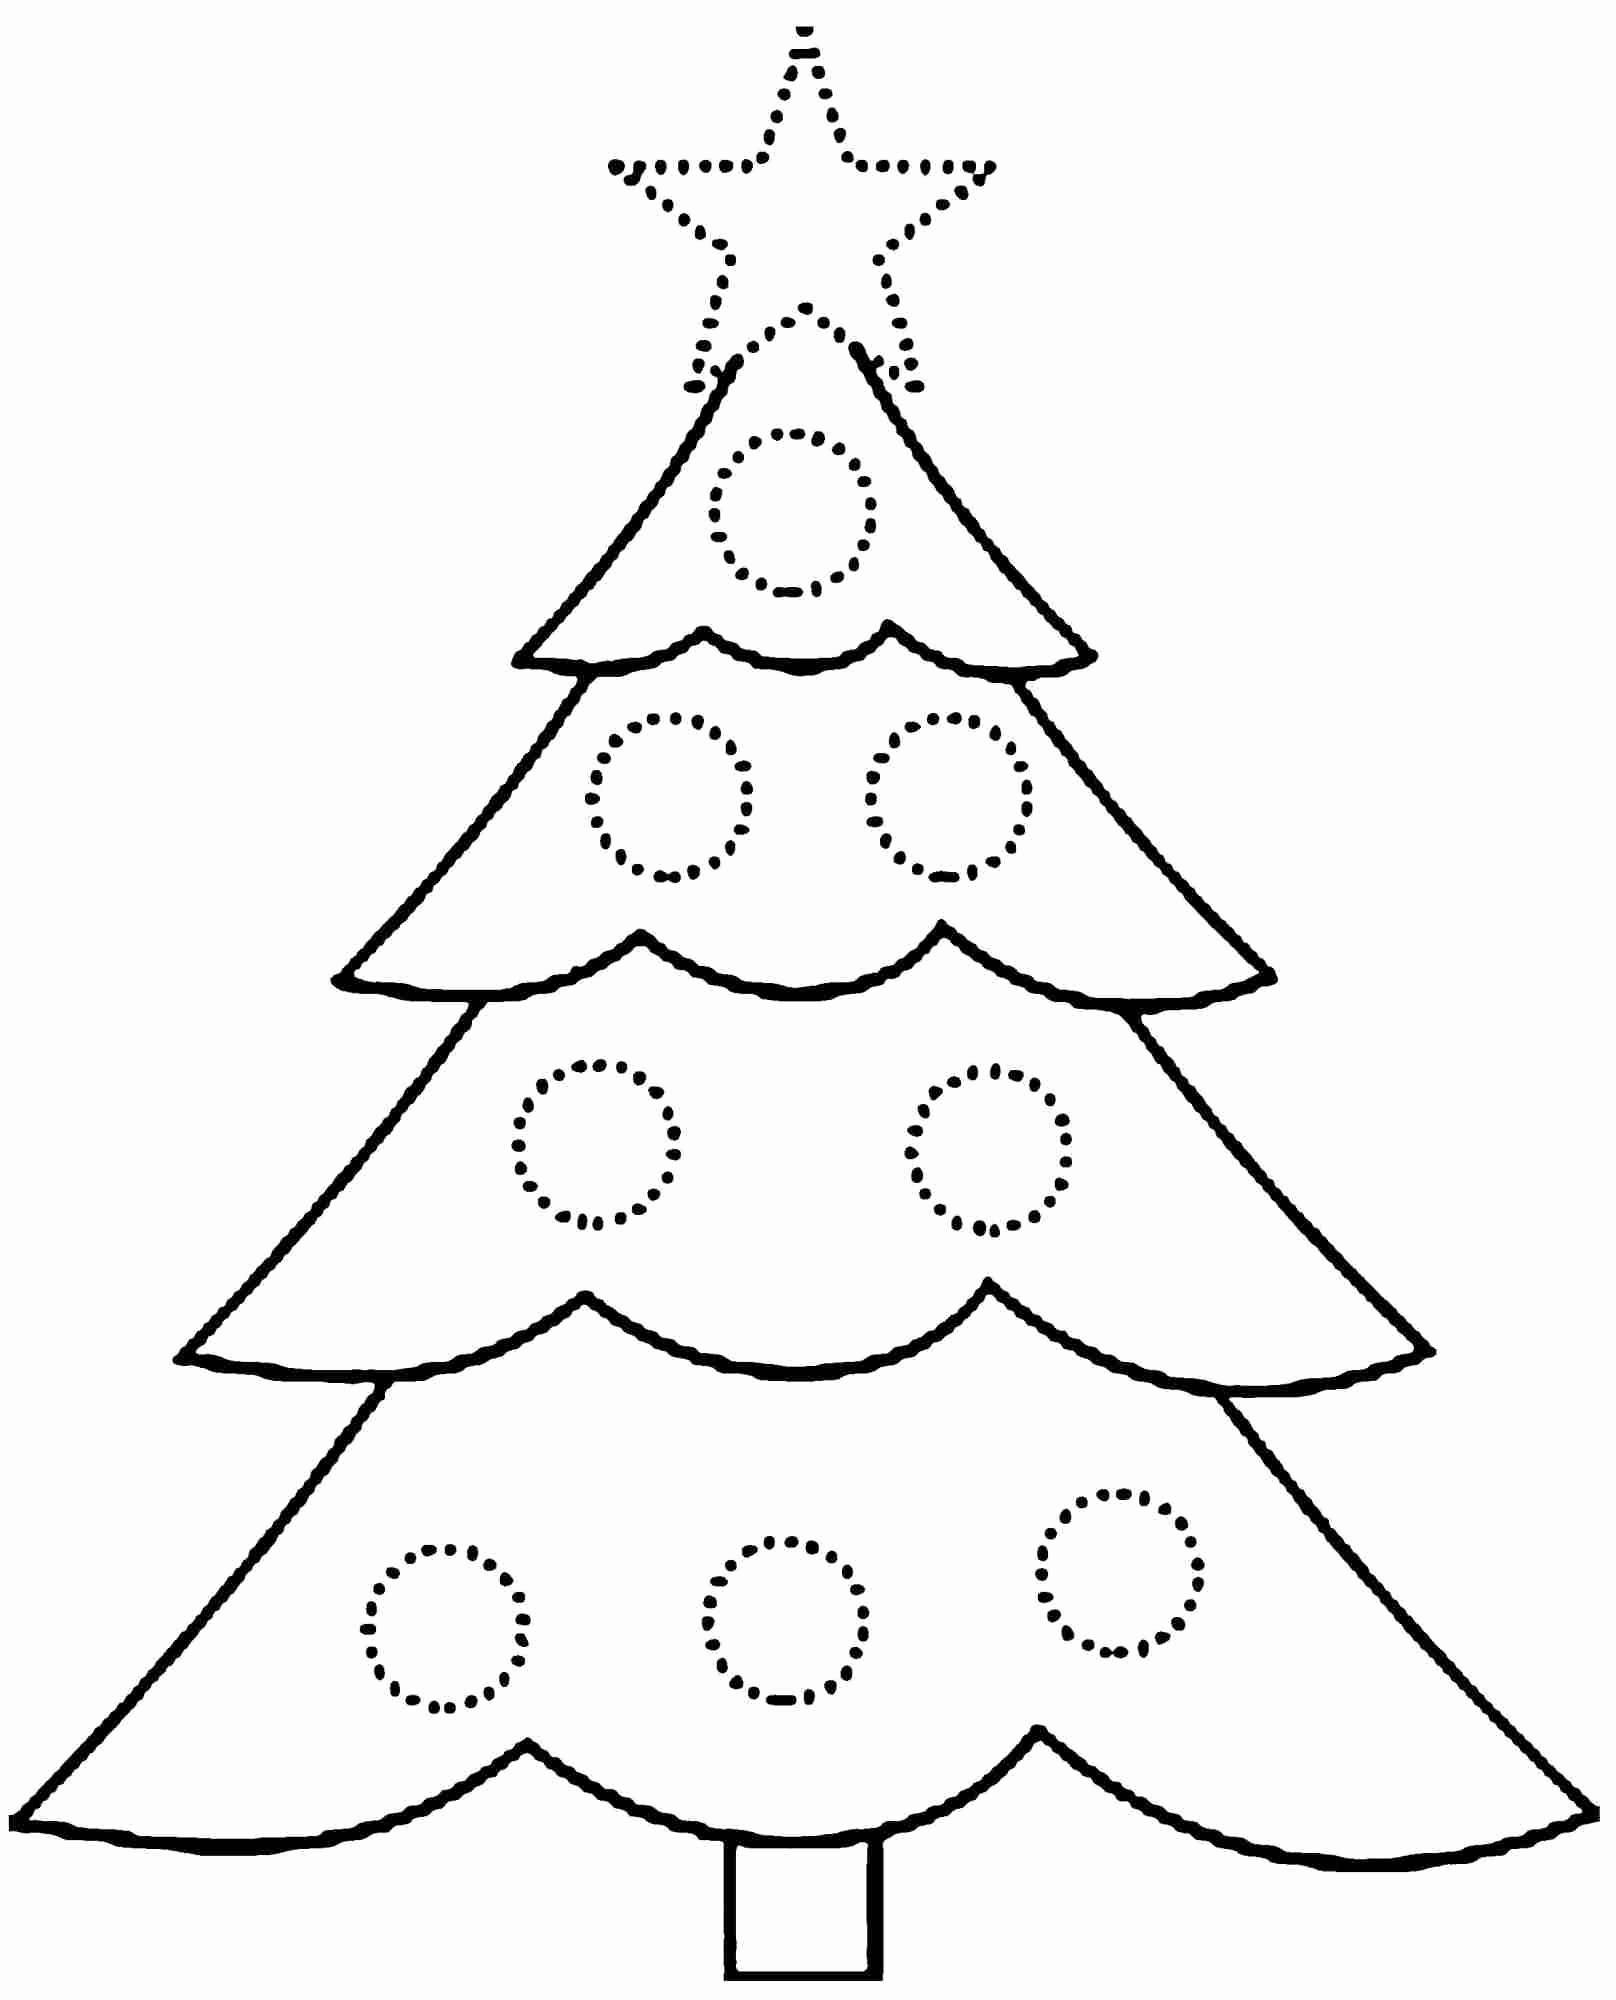 Coloring Pages Christmas Holly Best Free Printable Christmas Tree - Free Printable Christmas Tree Images